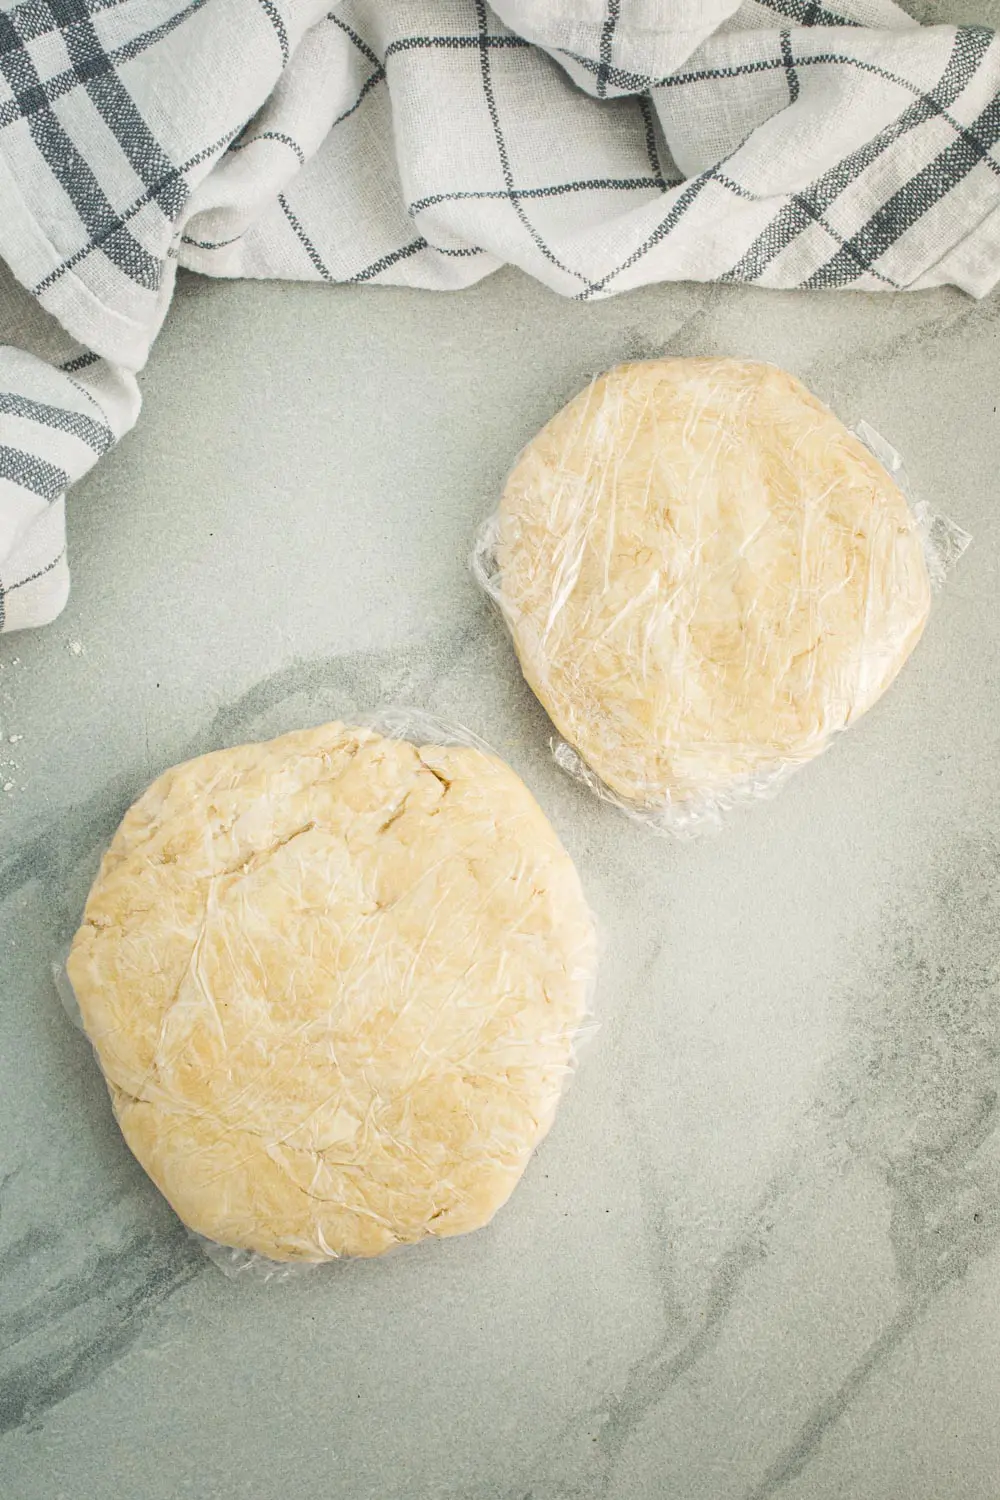 Flaky pie crust dough wrapped in plastic wrap.